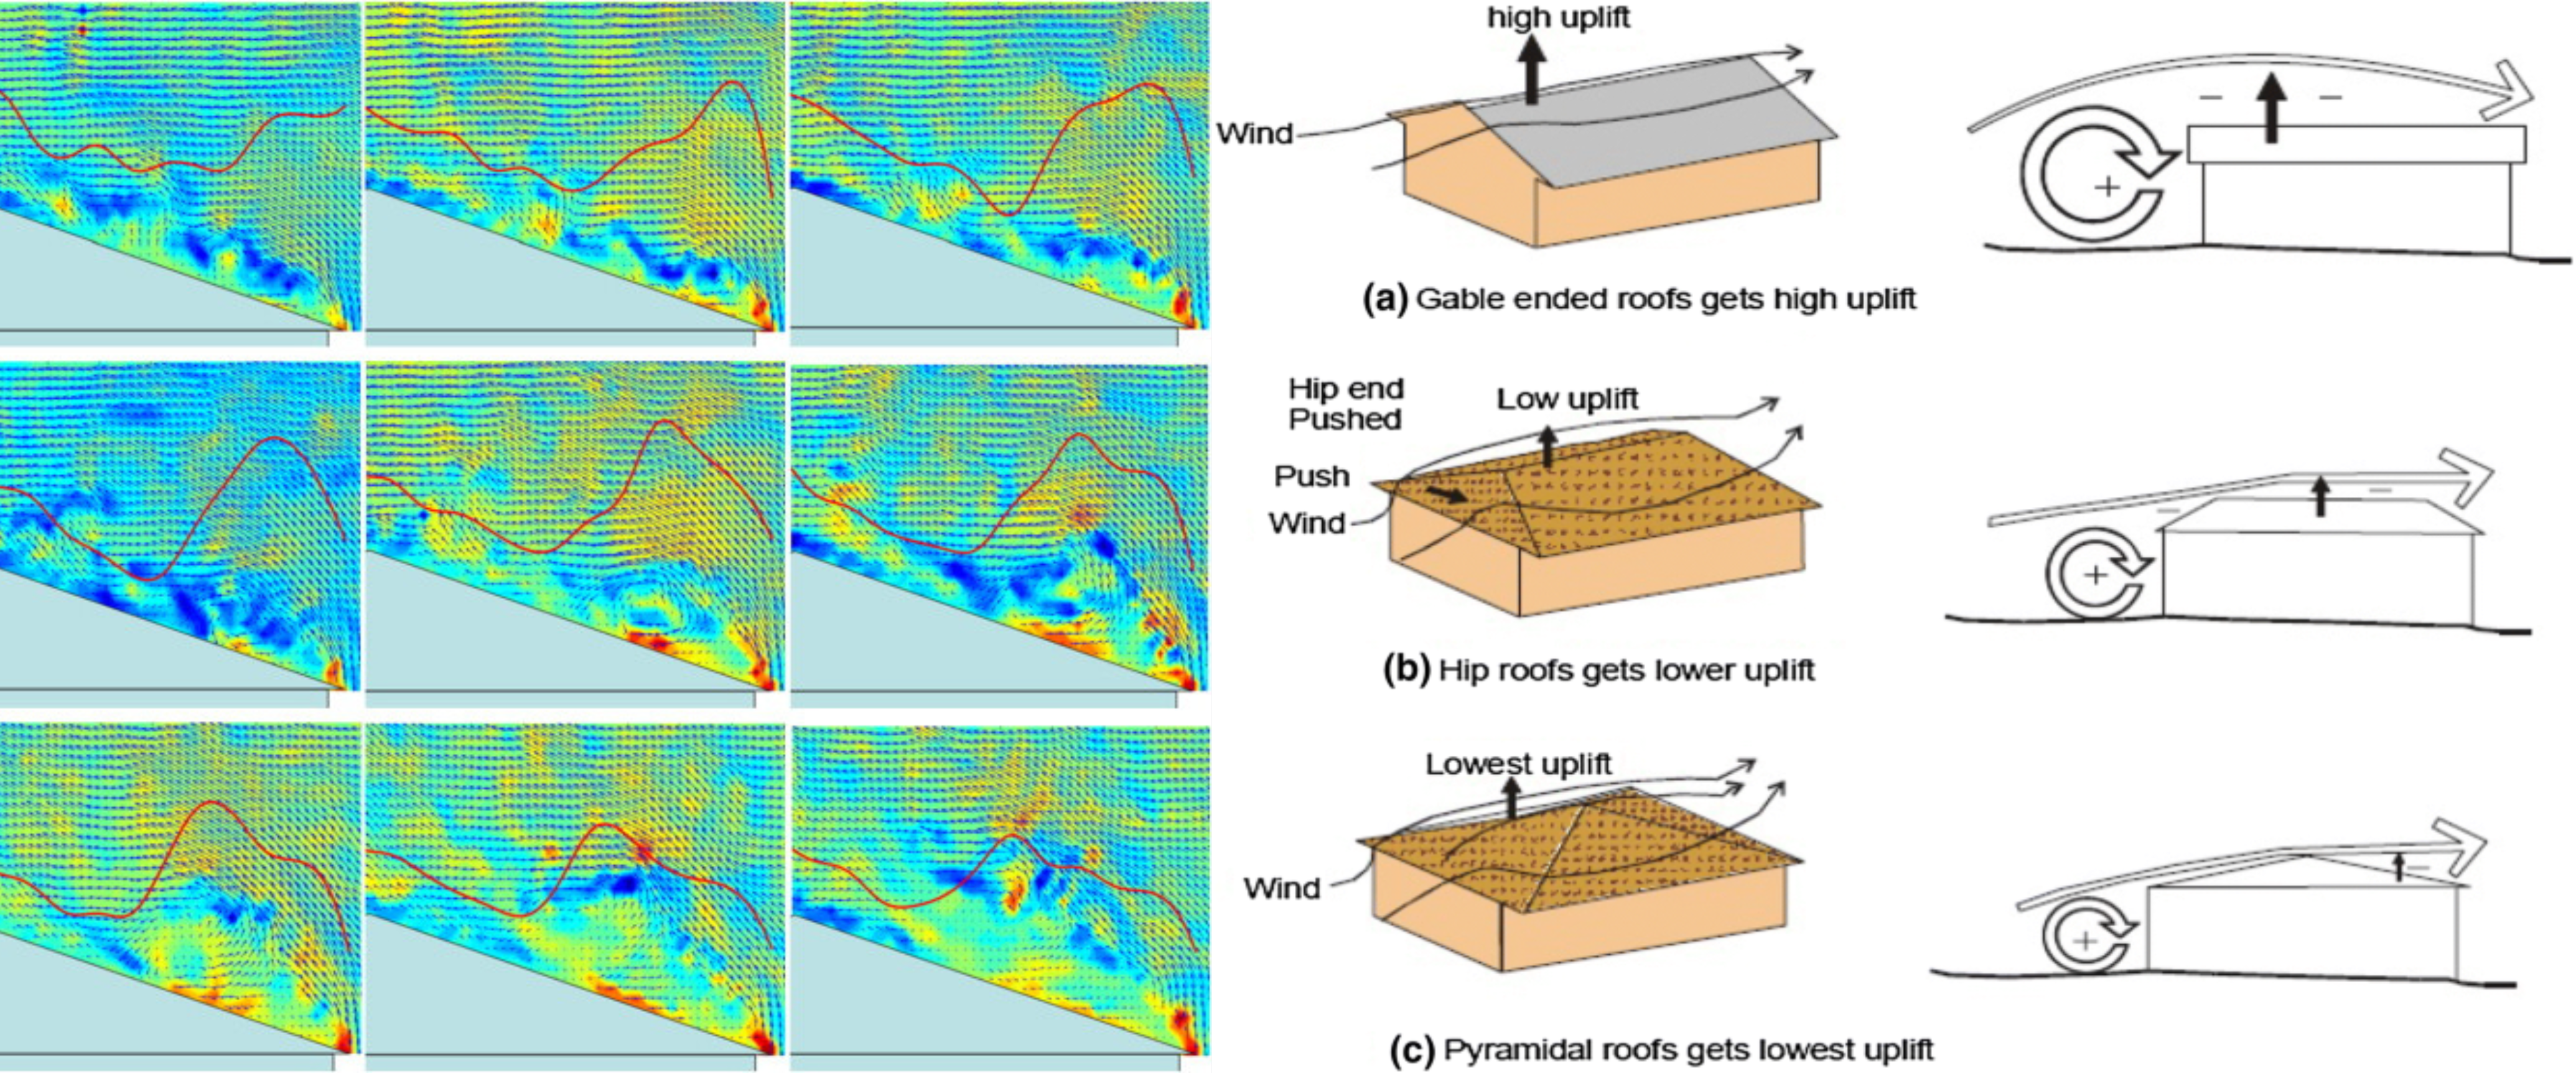 Residential Wind Load Heat Image + Rooftop Wind Comparisons